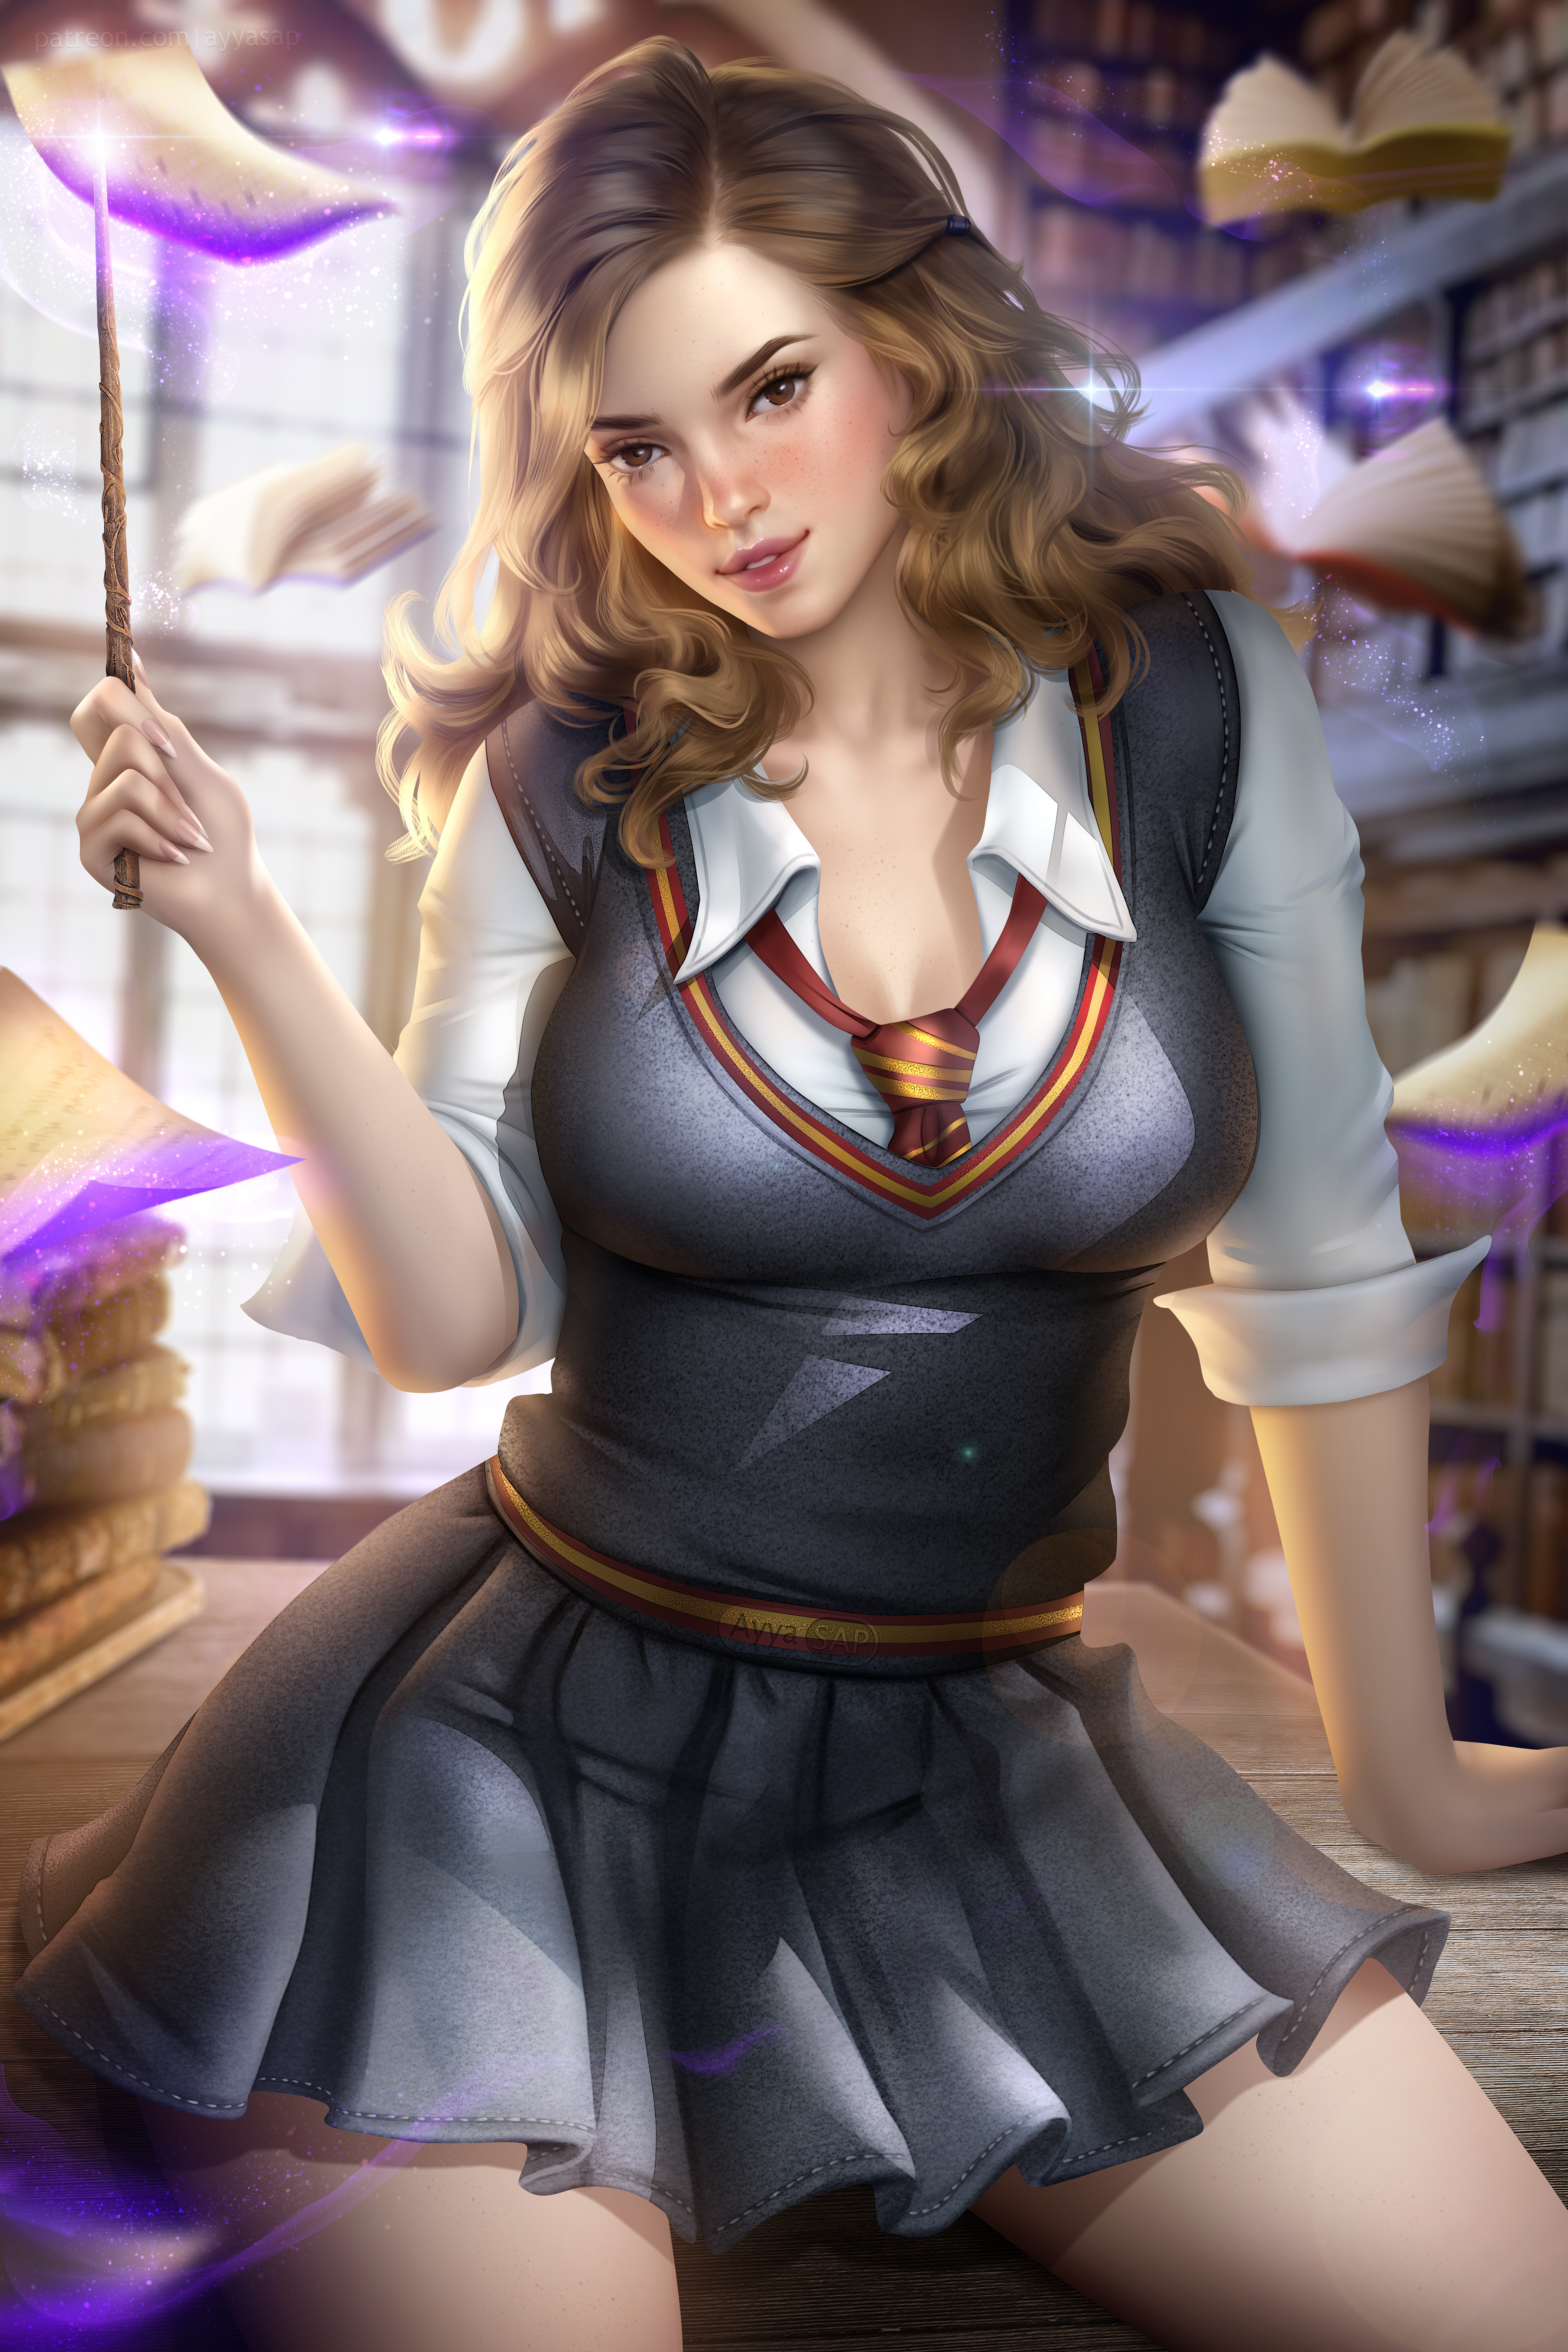 General 4800x7200 Hermione Granger Harry Potter fictional character women library books magic looking at viewer freckles parted lips wands school uniform Gryffindor cleavage sweater miniskirt sitting portrait display artwork drawing illustration fan art movies curvy Ayya Saparniyazova